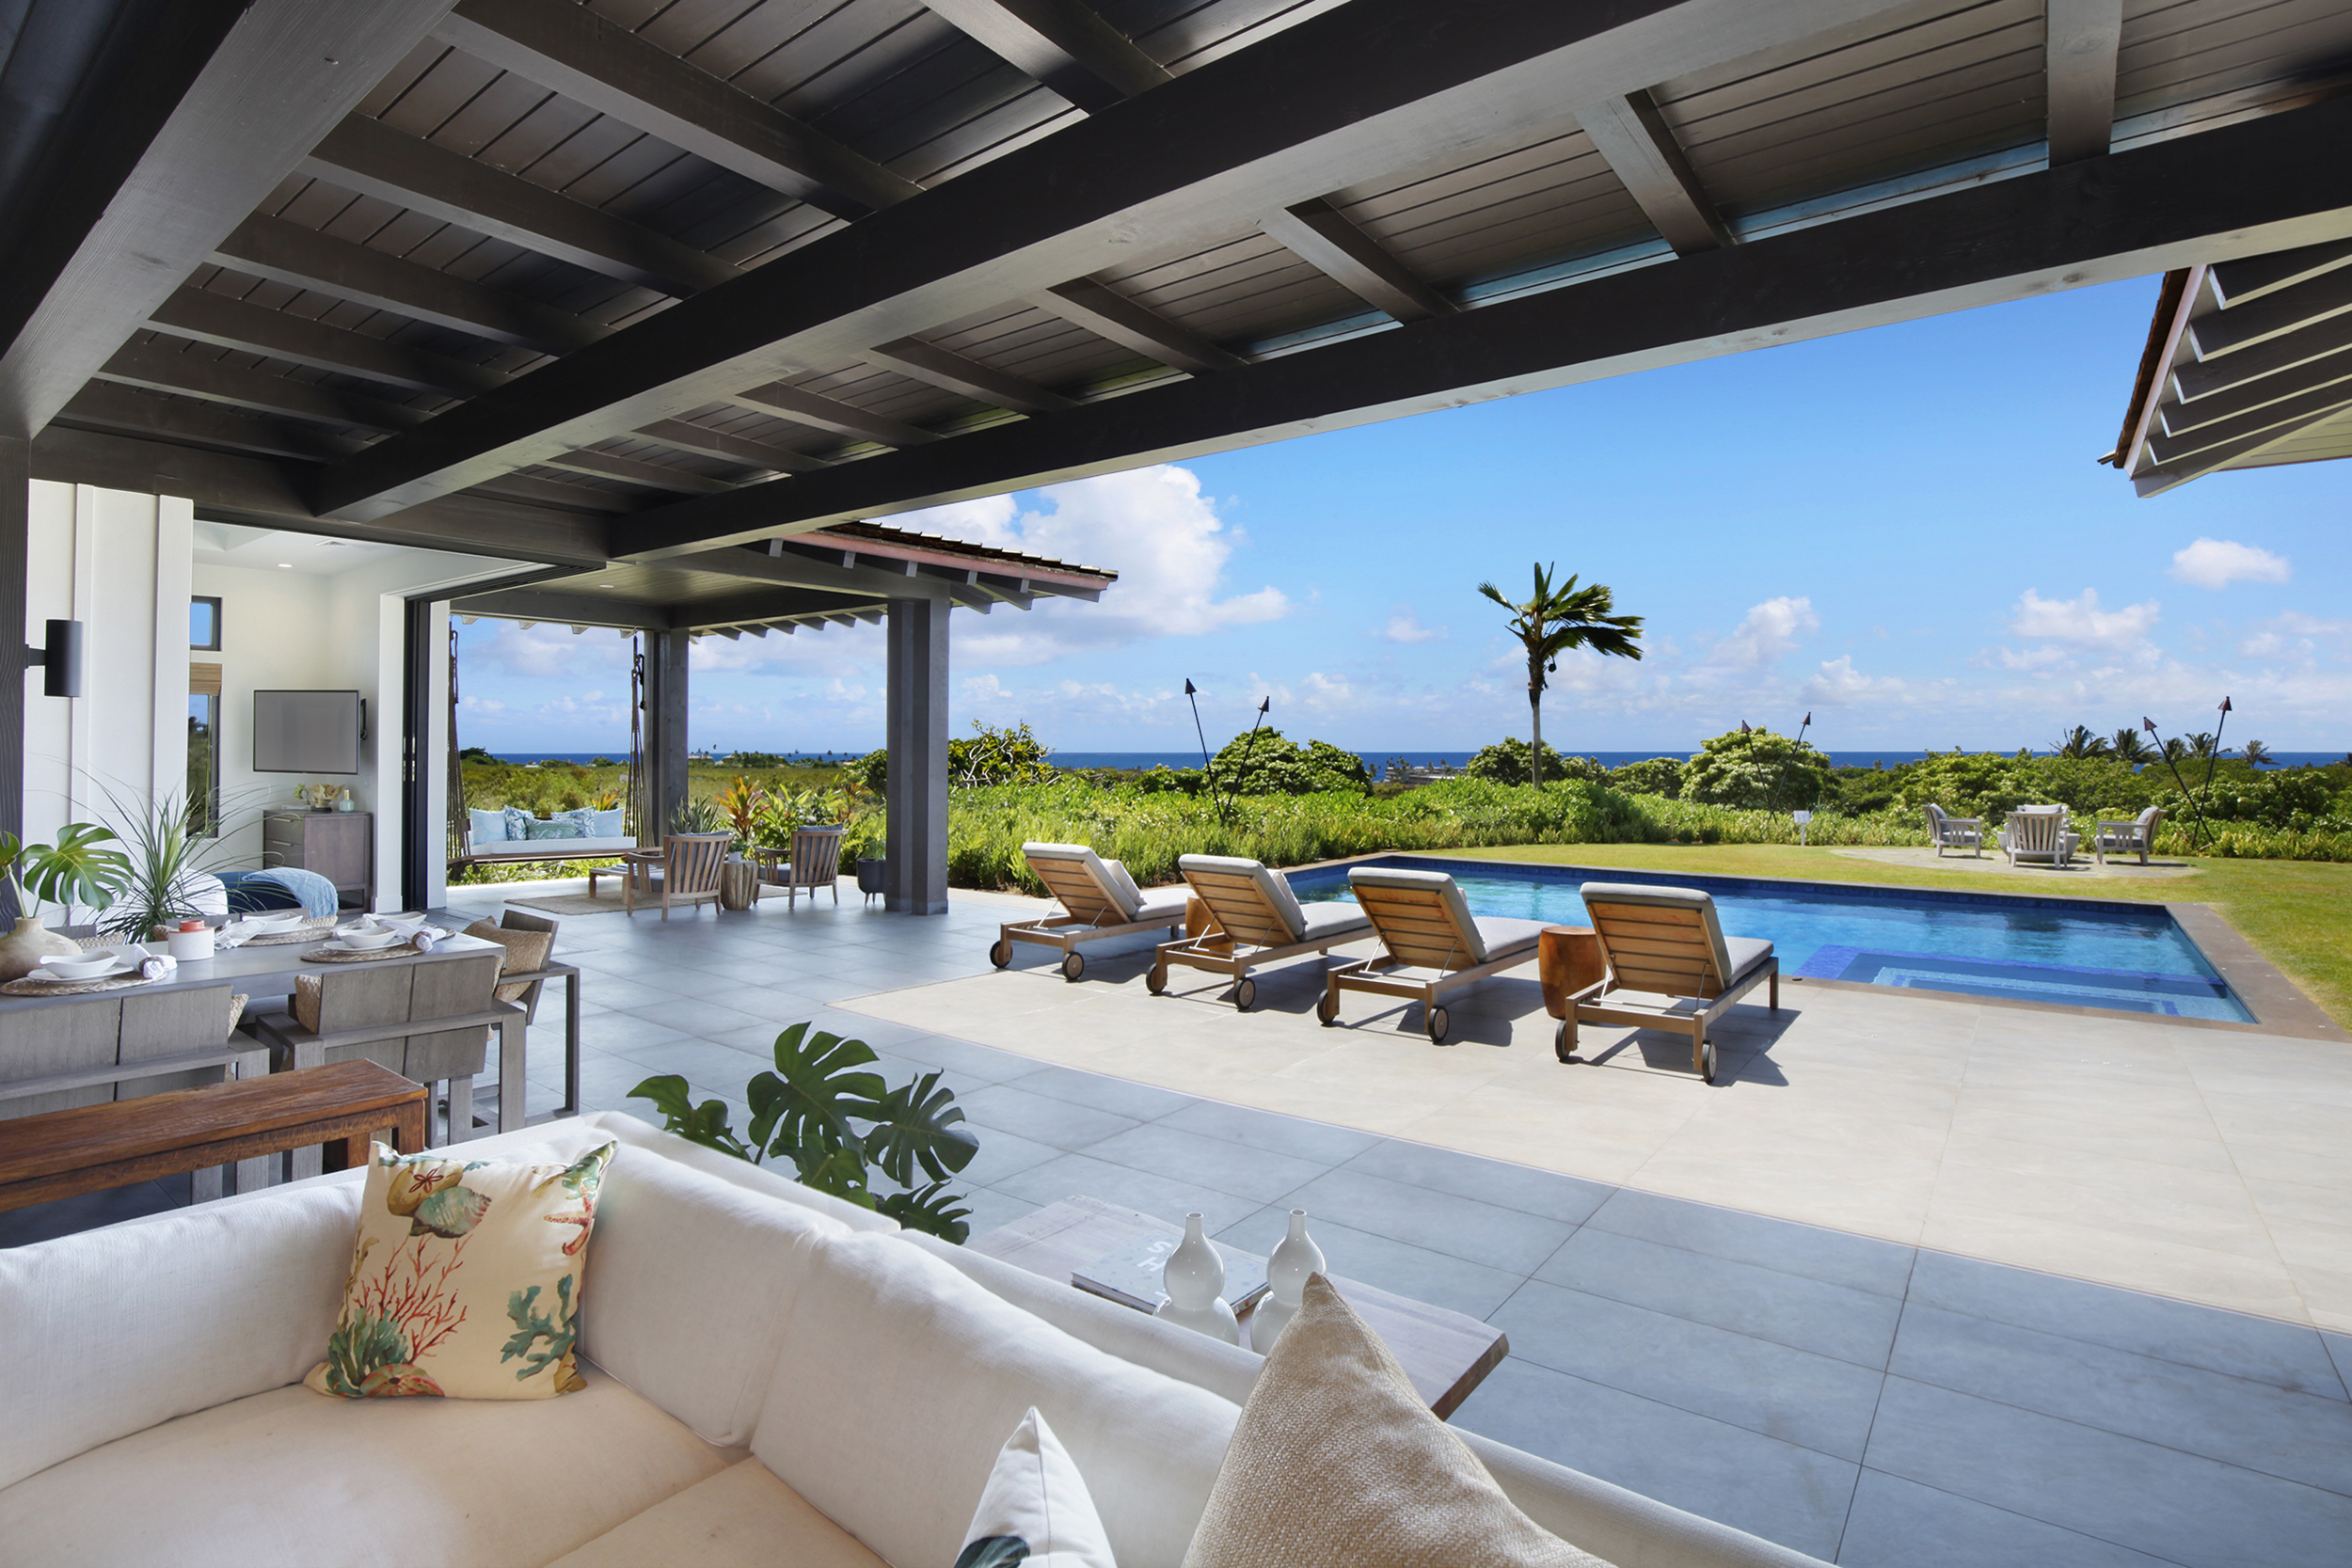 Outdoor living space and pool with ocean views